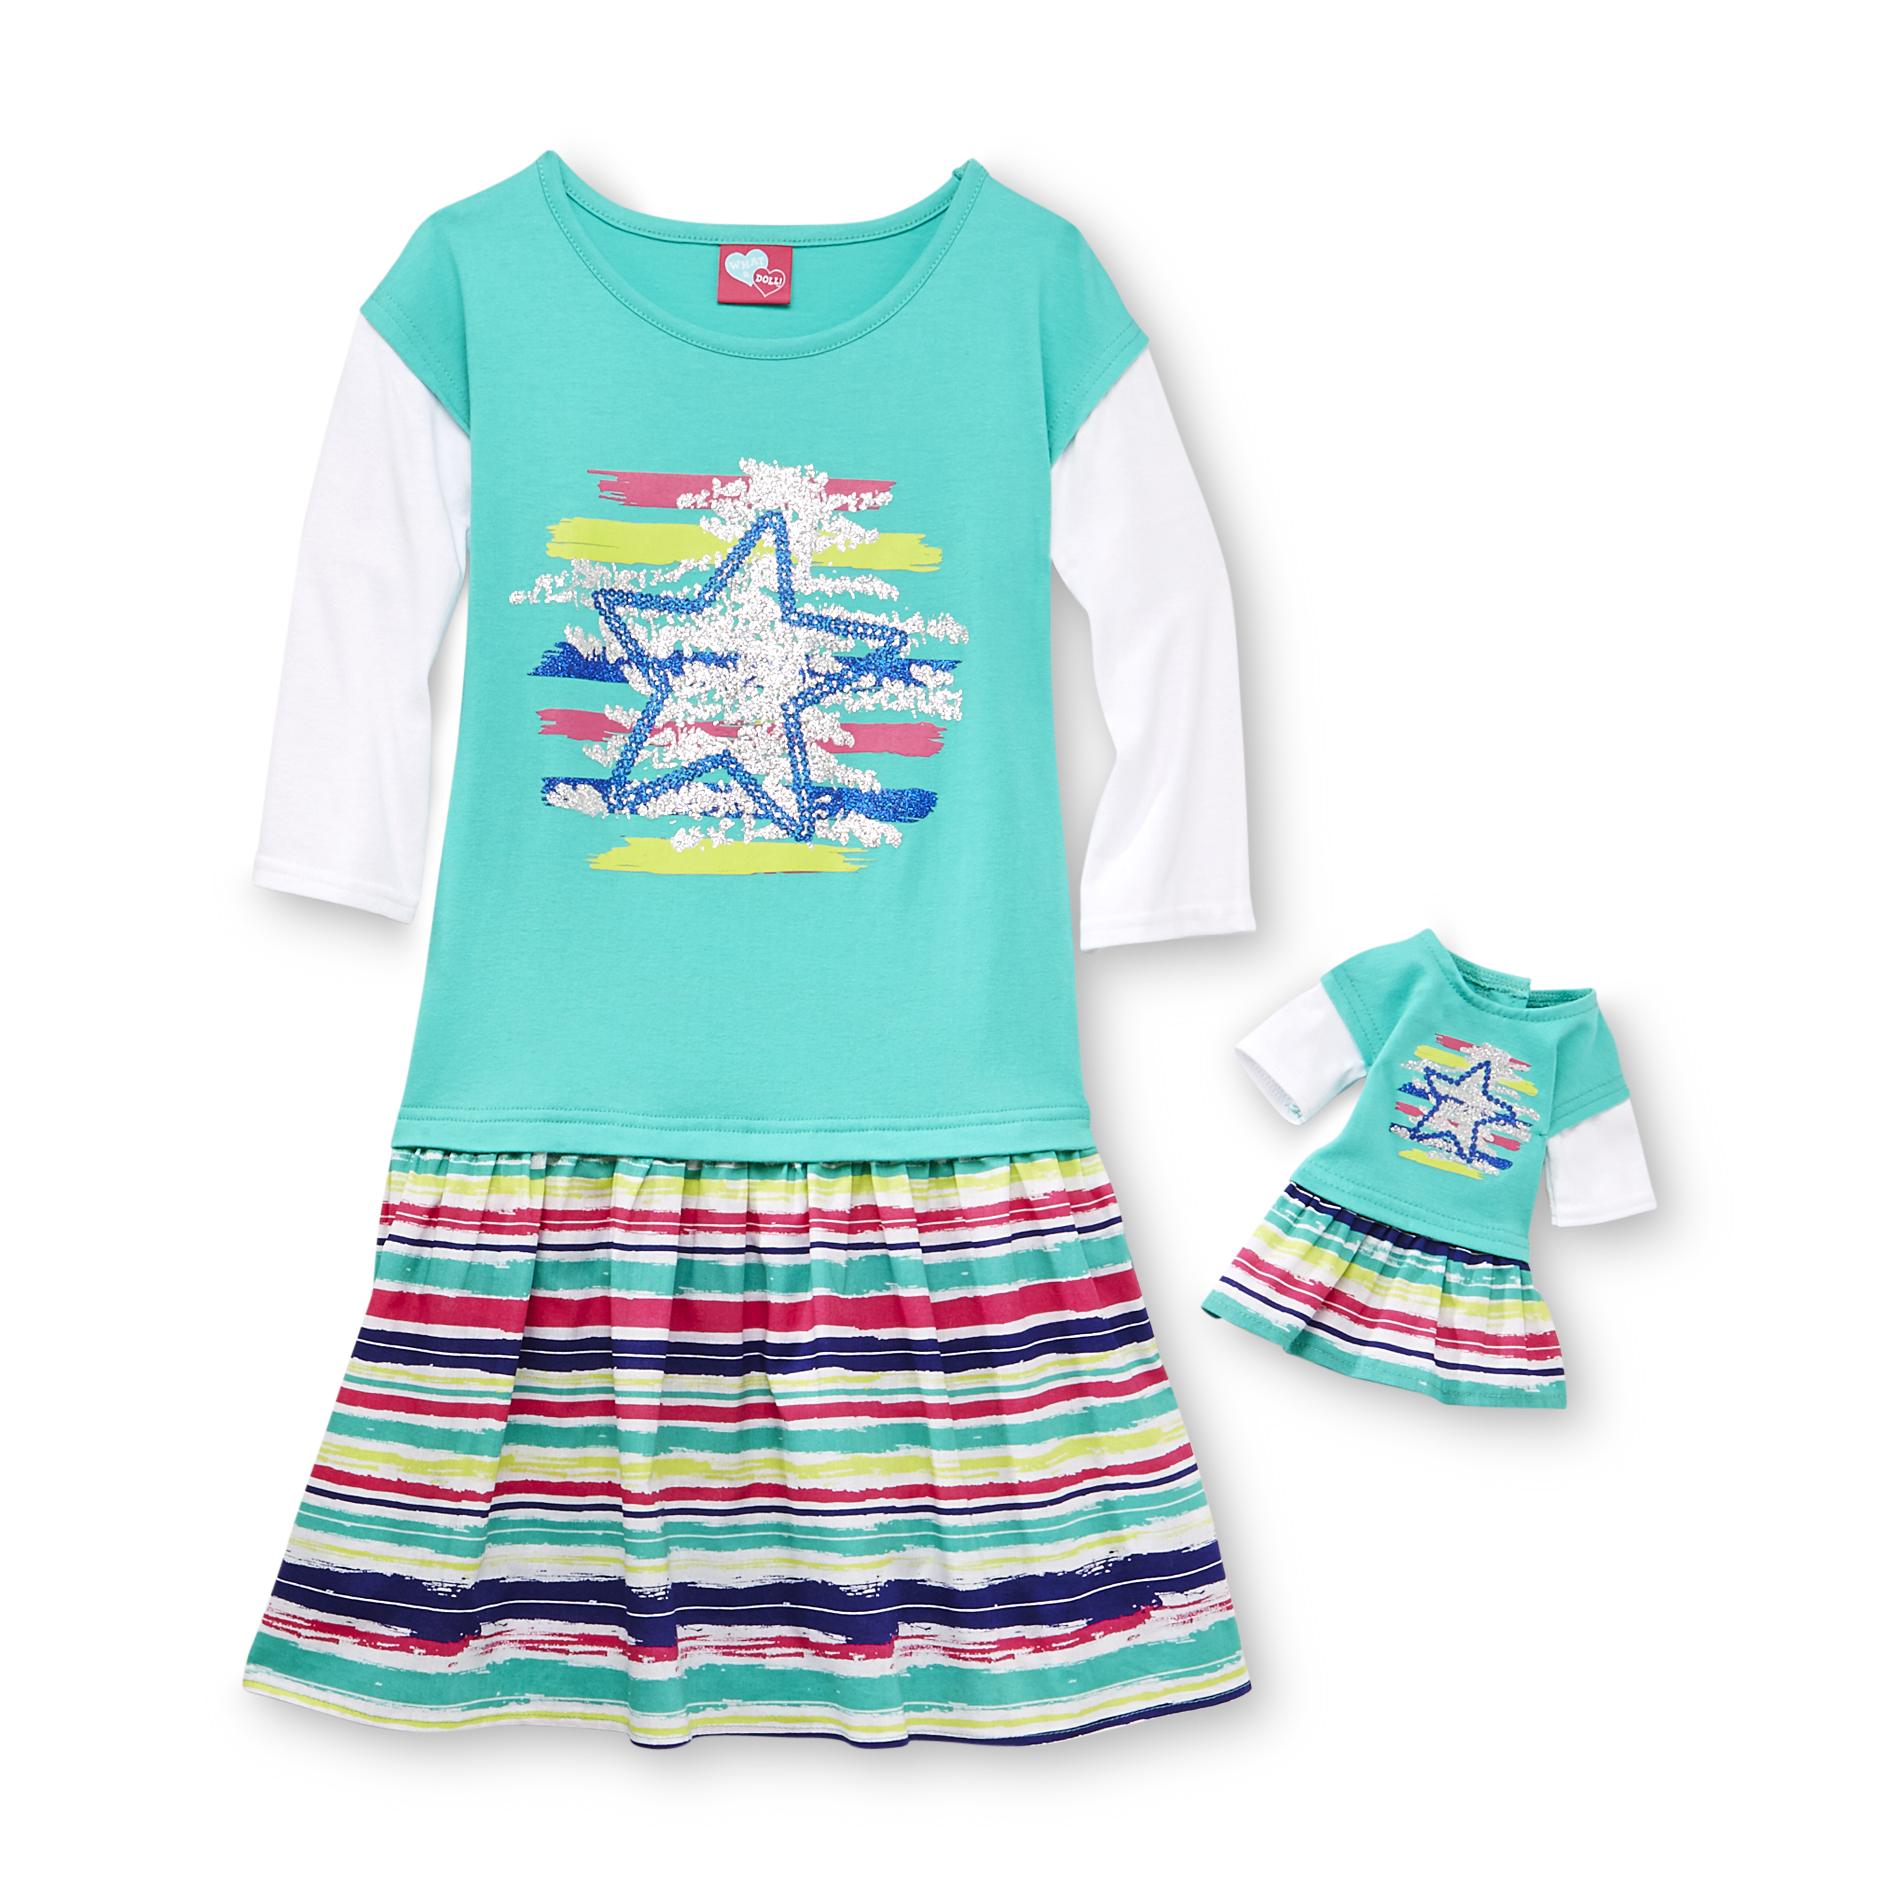 What A Doll Girl's Drop-Waist Dress & Doll Outfit - Stripe & Star